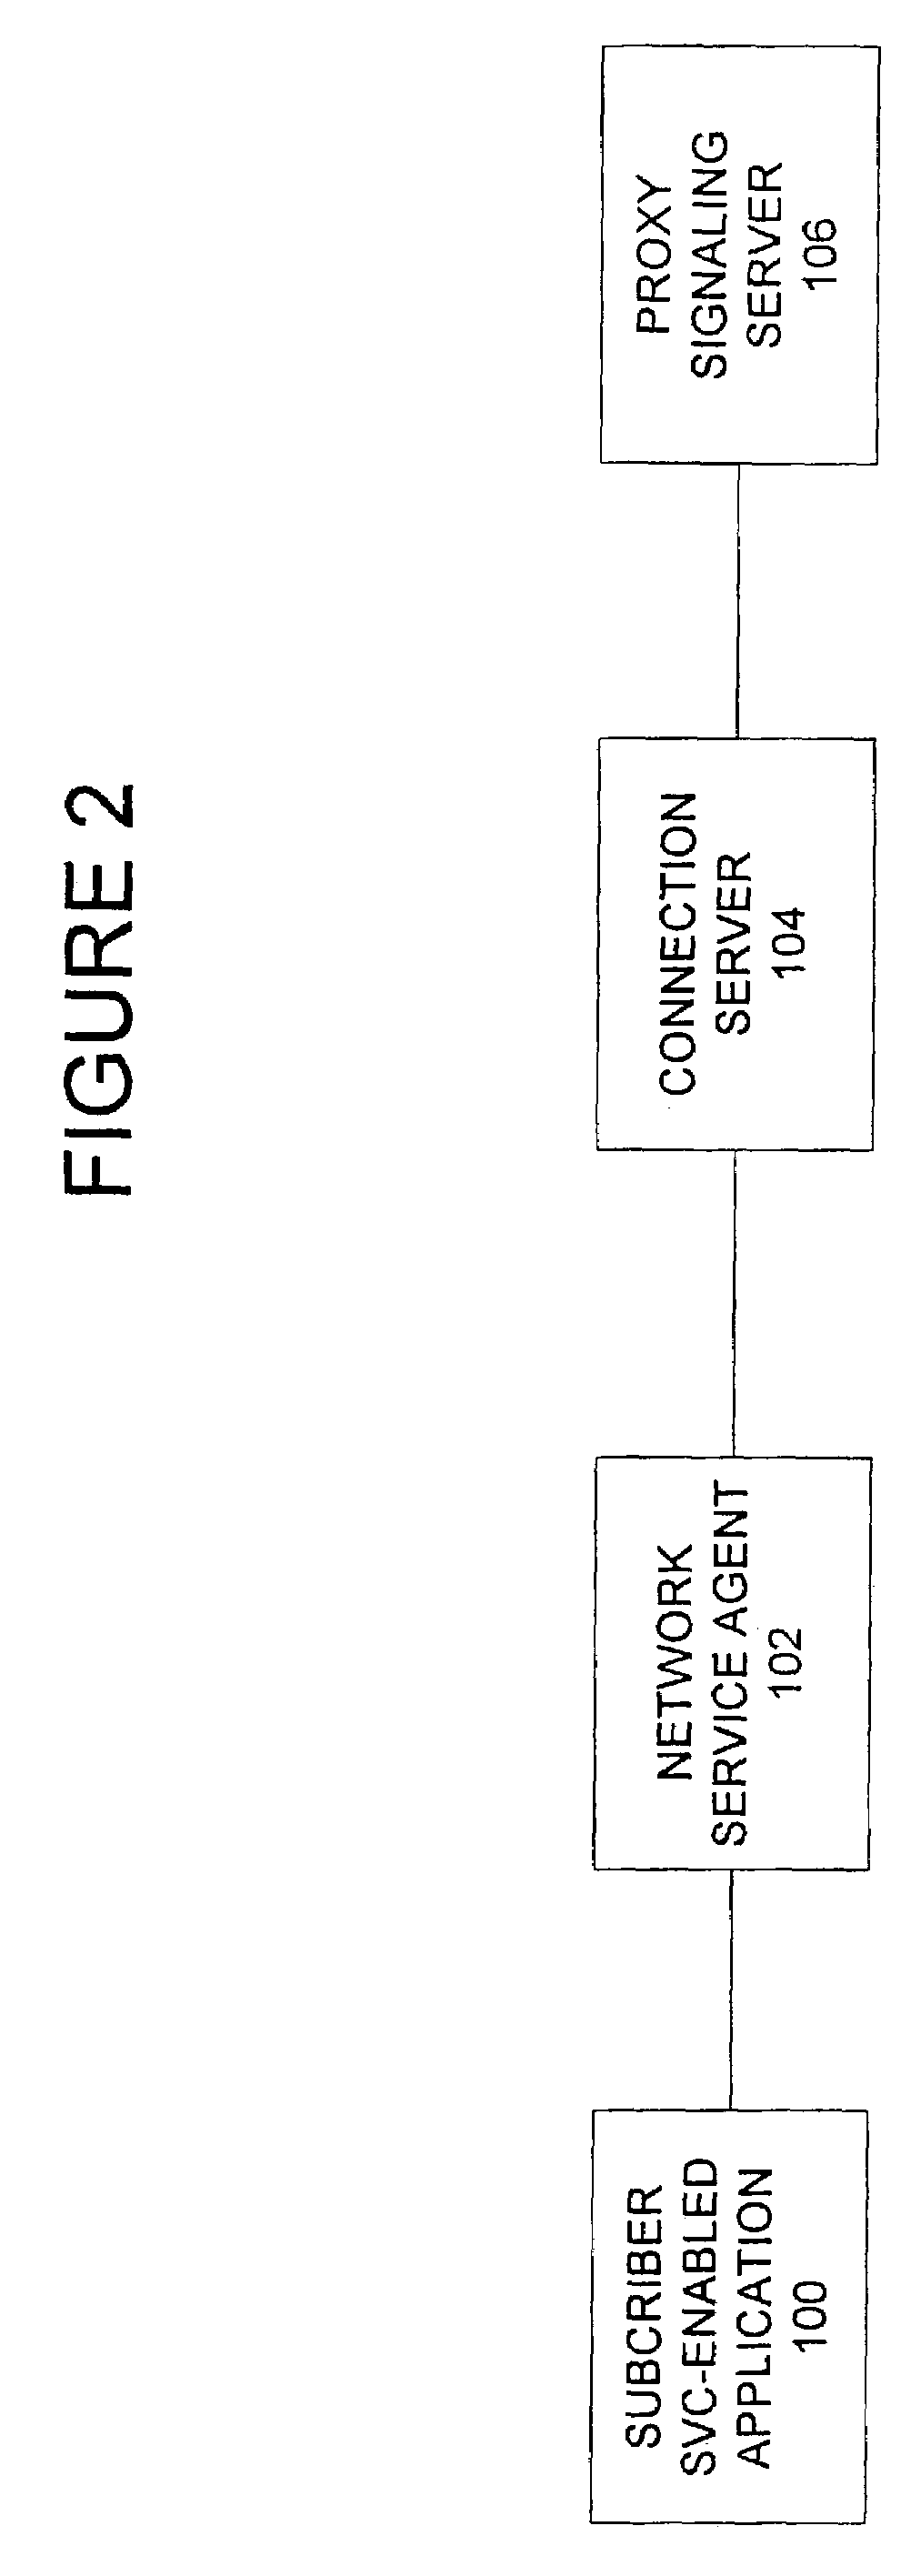 Extended virtual user-to-network interface with ATM network